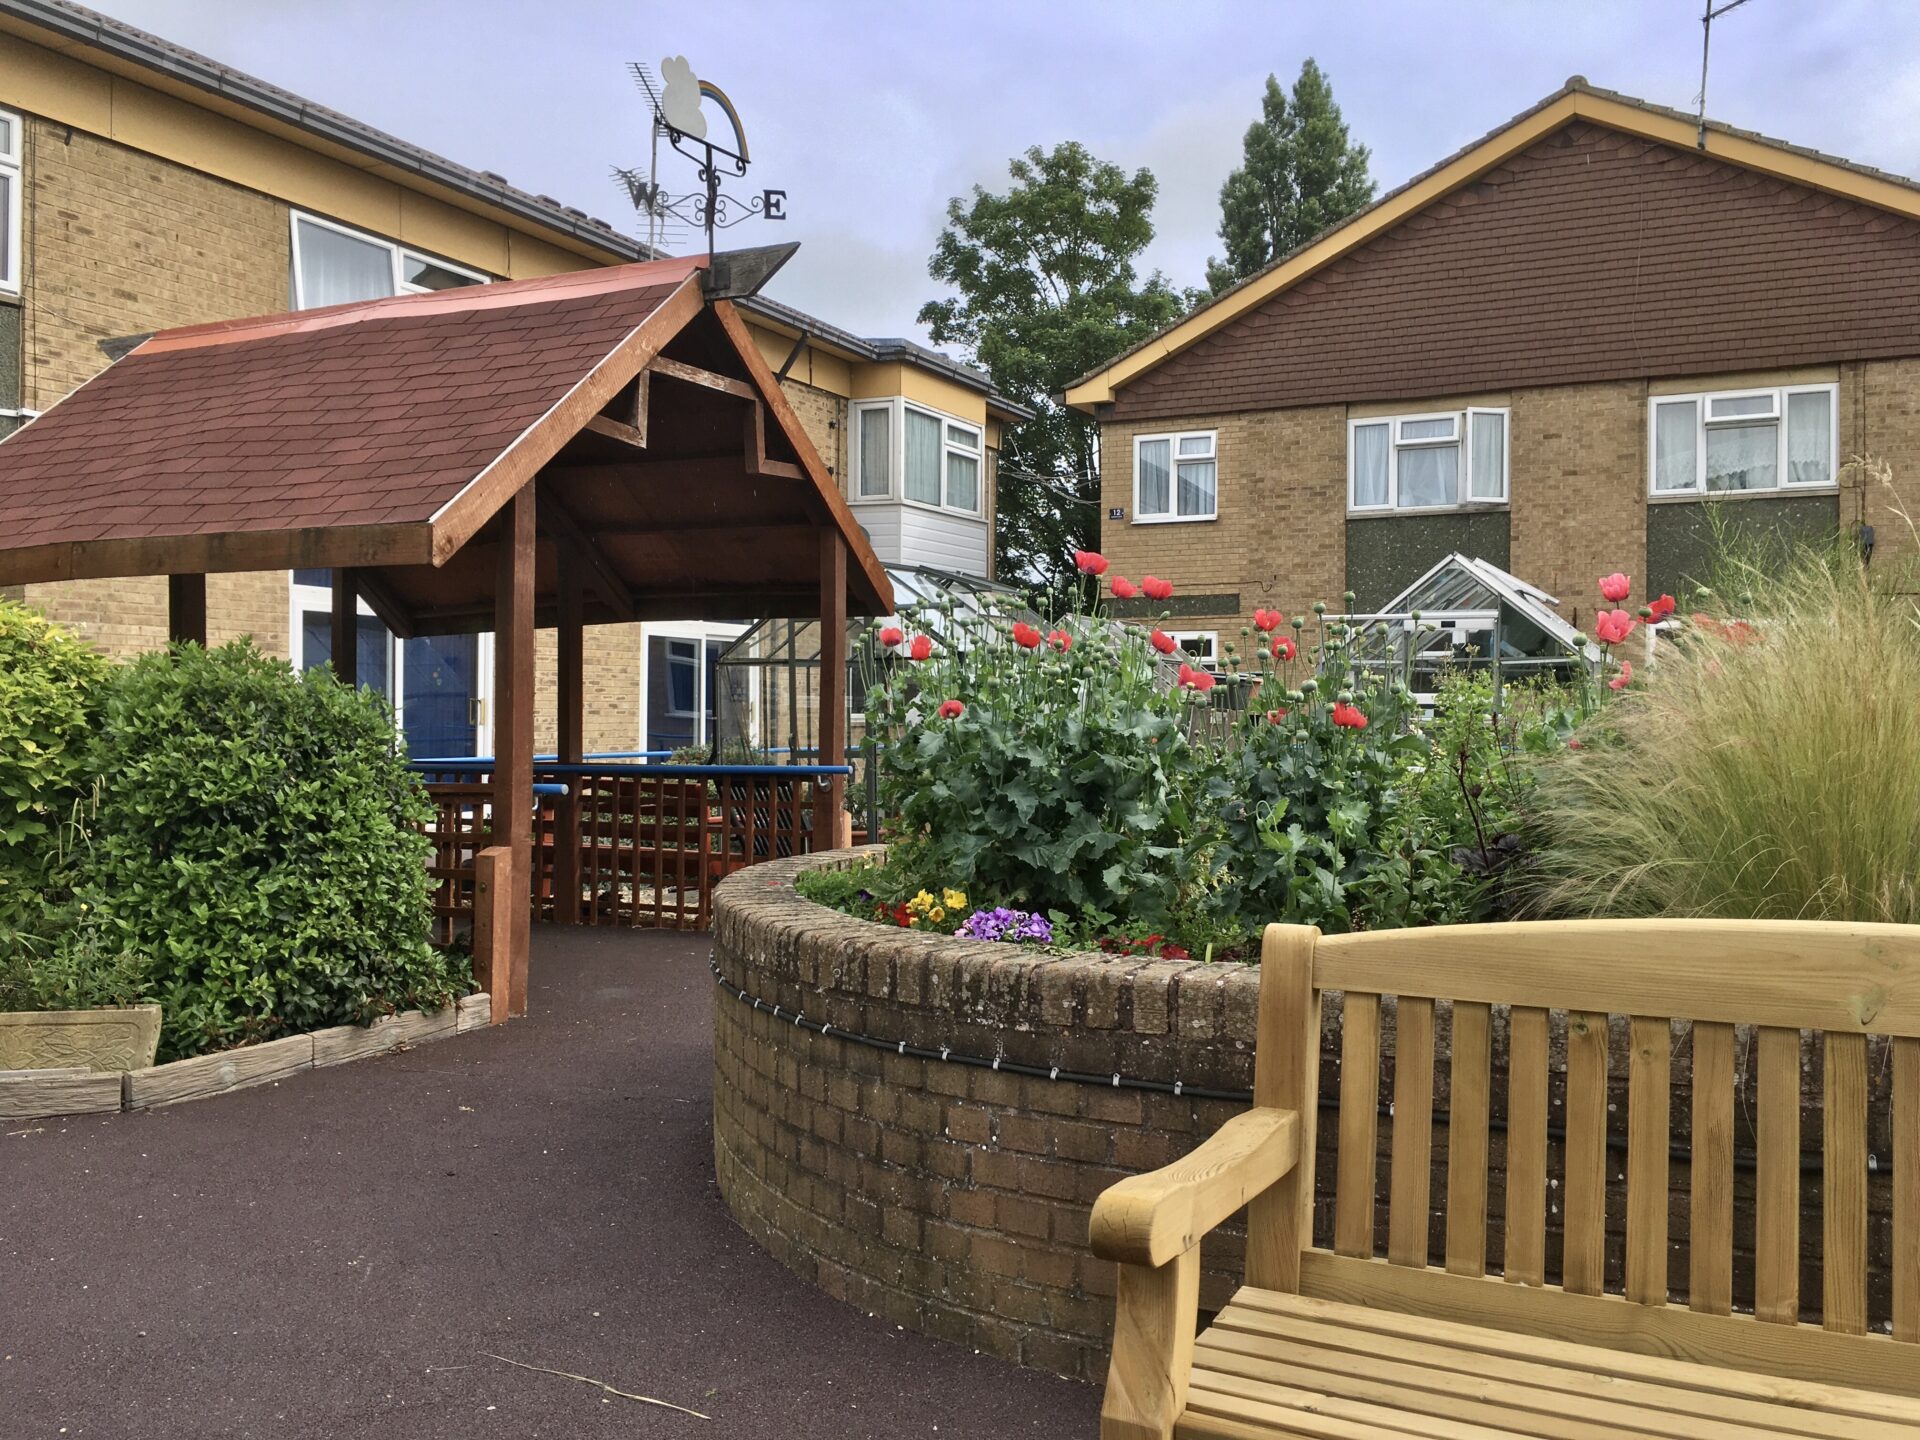 Image of Rainbow court supported living in Peterborough. Brown brick buildings with red poppy flowers outside. There is the top of a green house which can be seen in the right of the image over the flowers and a bench in the bottom right of the photo infront of the raised flower bed. To the left of the photo you have an entrance which has a brown wooden porch with blue railings either side.